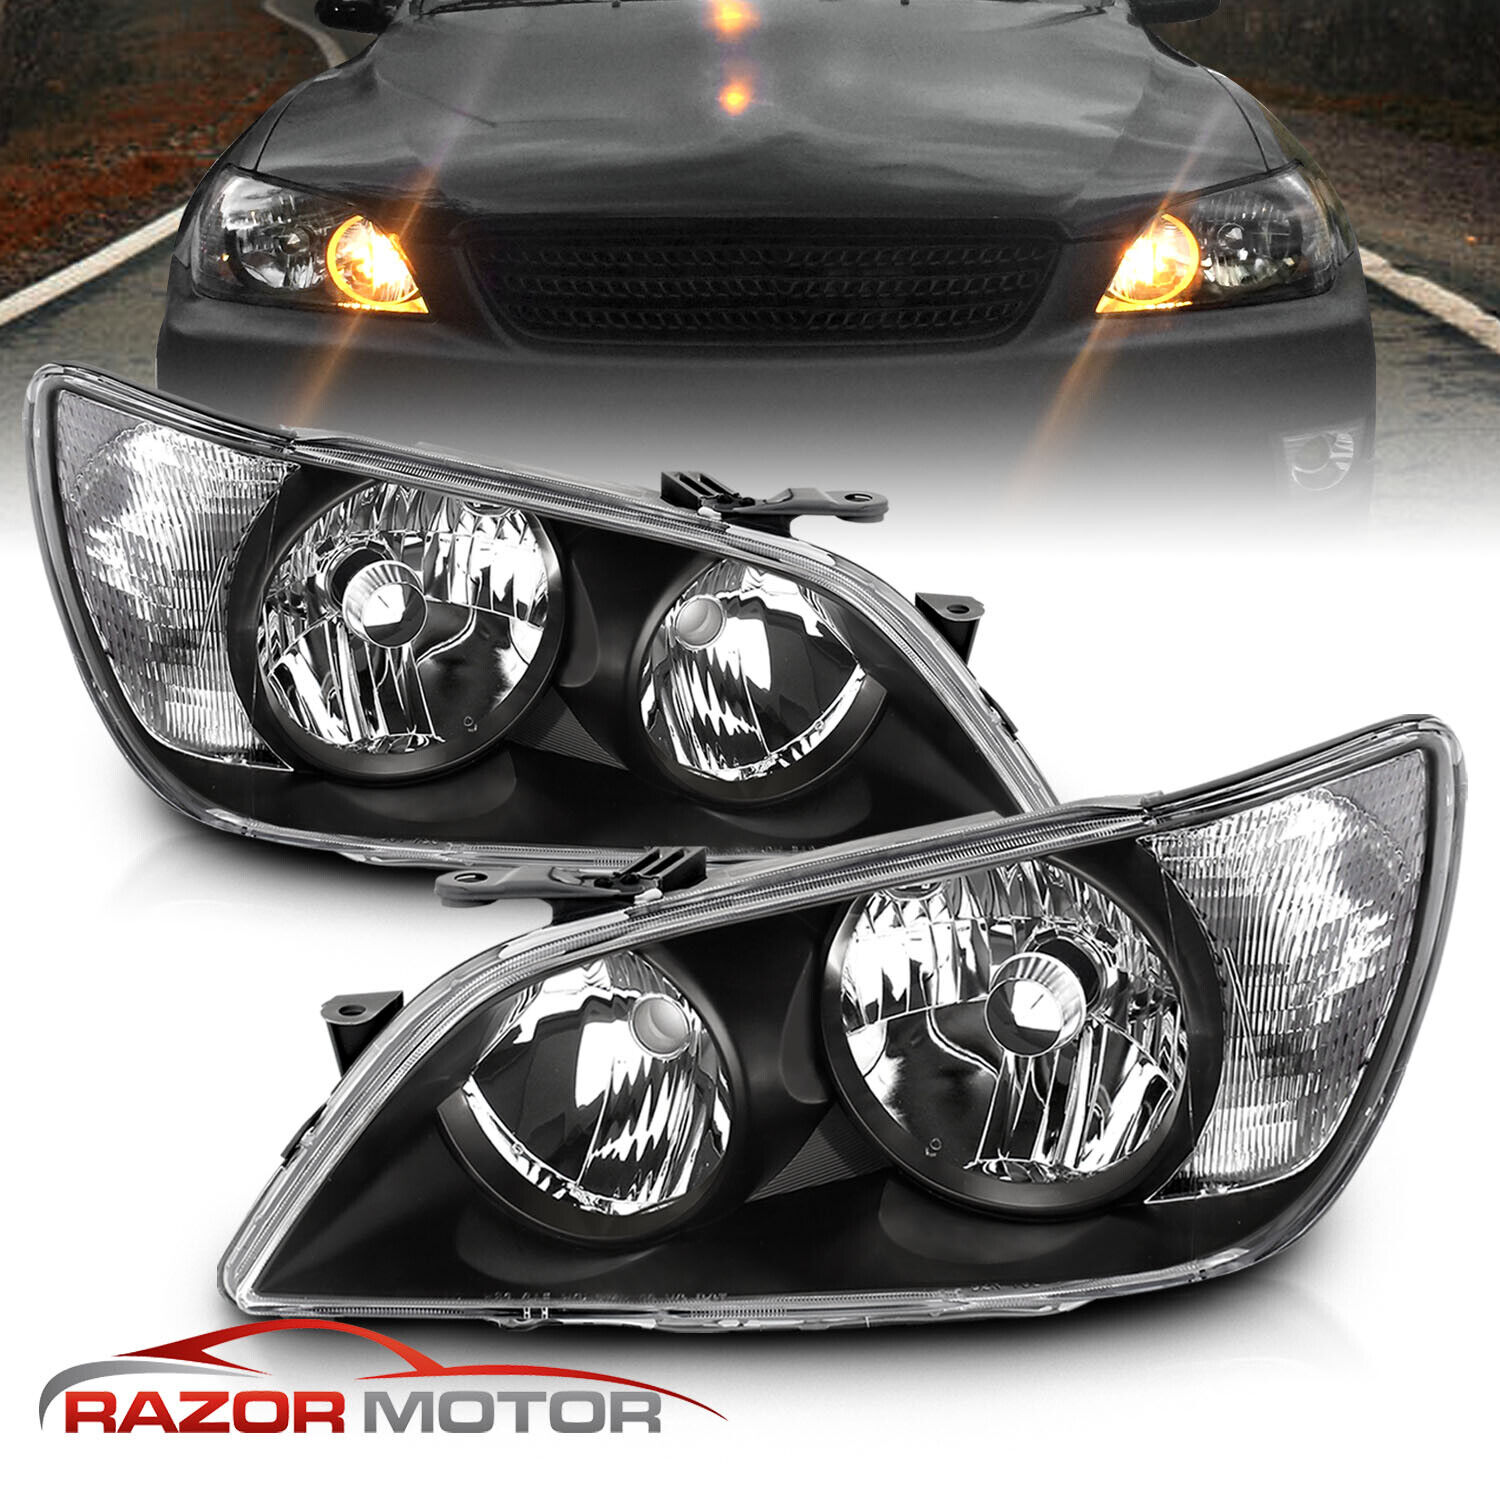 2001-2005 Factory Black OE Headlight Assembly Pair for Lexus IS300 Left+Right